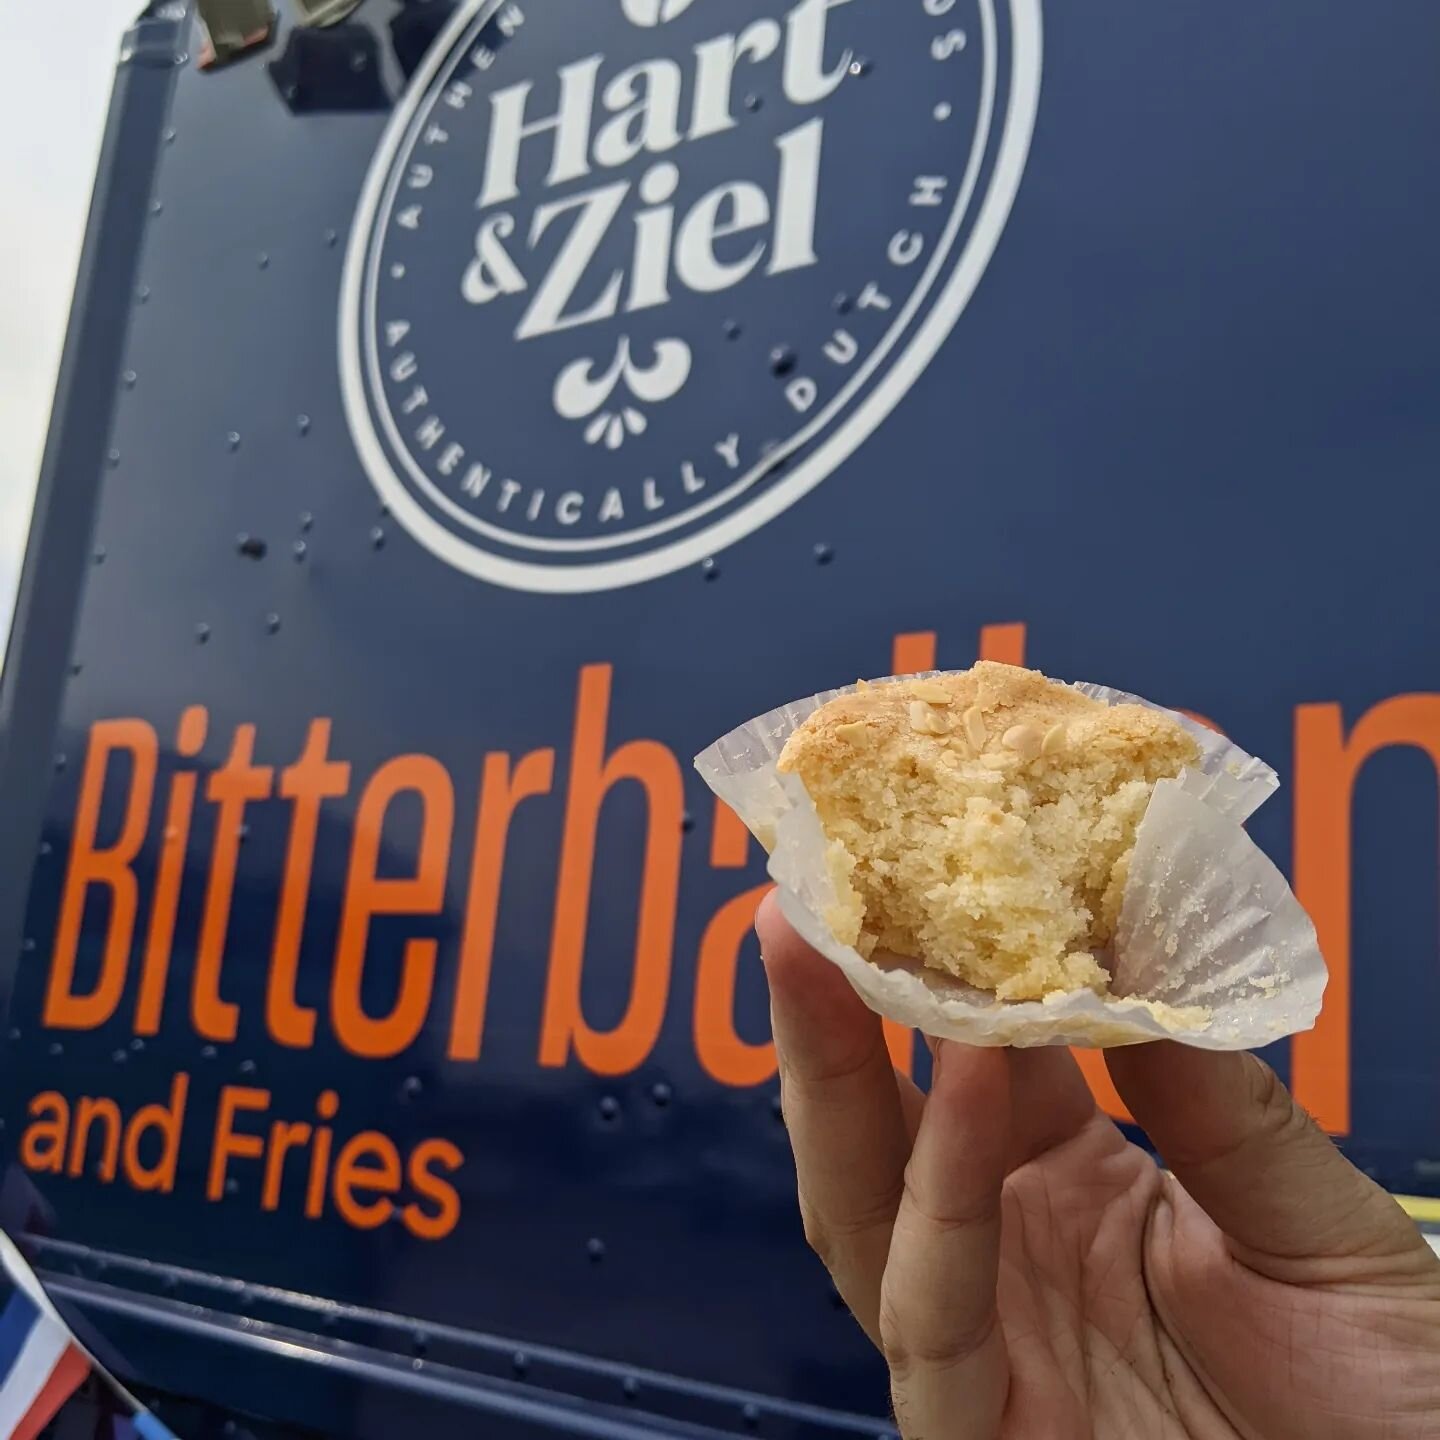 Did you know that we serve 100% gluten free food in our food truck? Did you know that includes some of the most delicious Dutch Boeterkoek we've ever had? 🤤🤤
We might be biased, but you be the judge. Come try some at the @jalopyjamup this weekend i